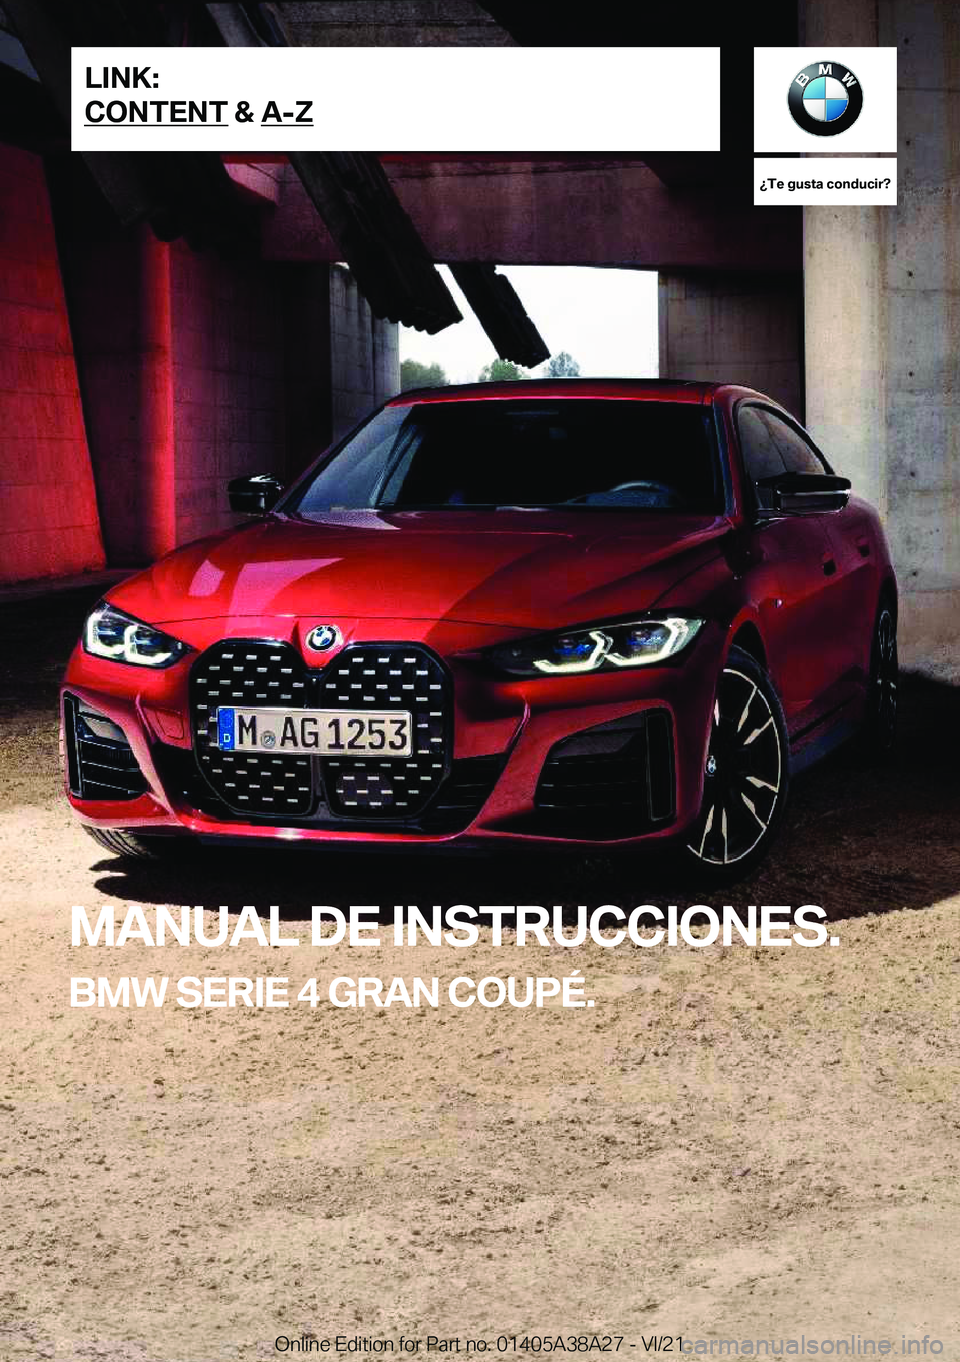 BMW 4 SERIES GRAN COUPE 2022  Manuales de Empleo (in Spanish) ��T�e��g�u�s�t�a��c�o�n�d�u�c�i�r� 
�M�A�N�U�A�L��D�E��I�N�S�T�R�U�C�C�I�O�N�E�S�.
�B�M�W��S�E�R�I�E��4��G�R�A�N��C�O�U�P�